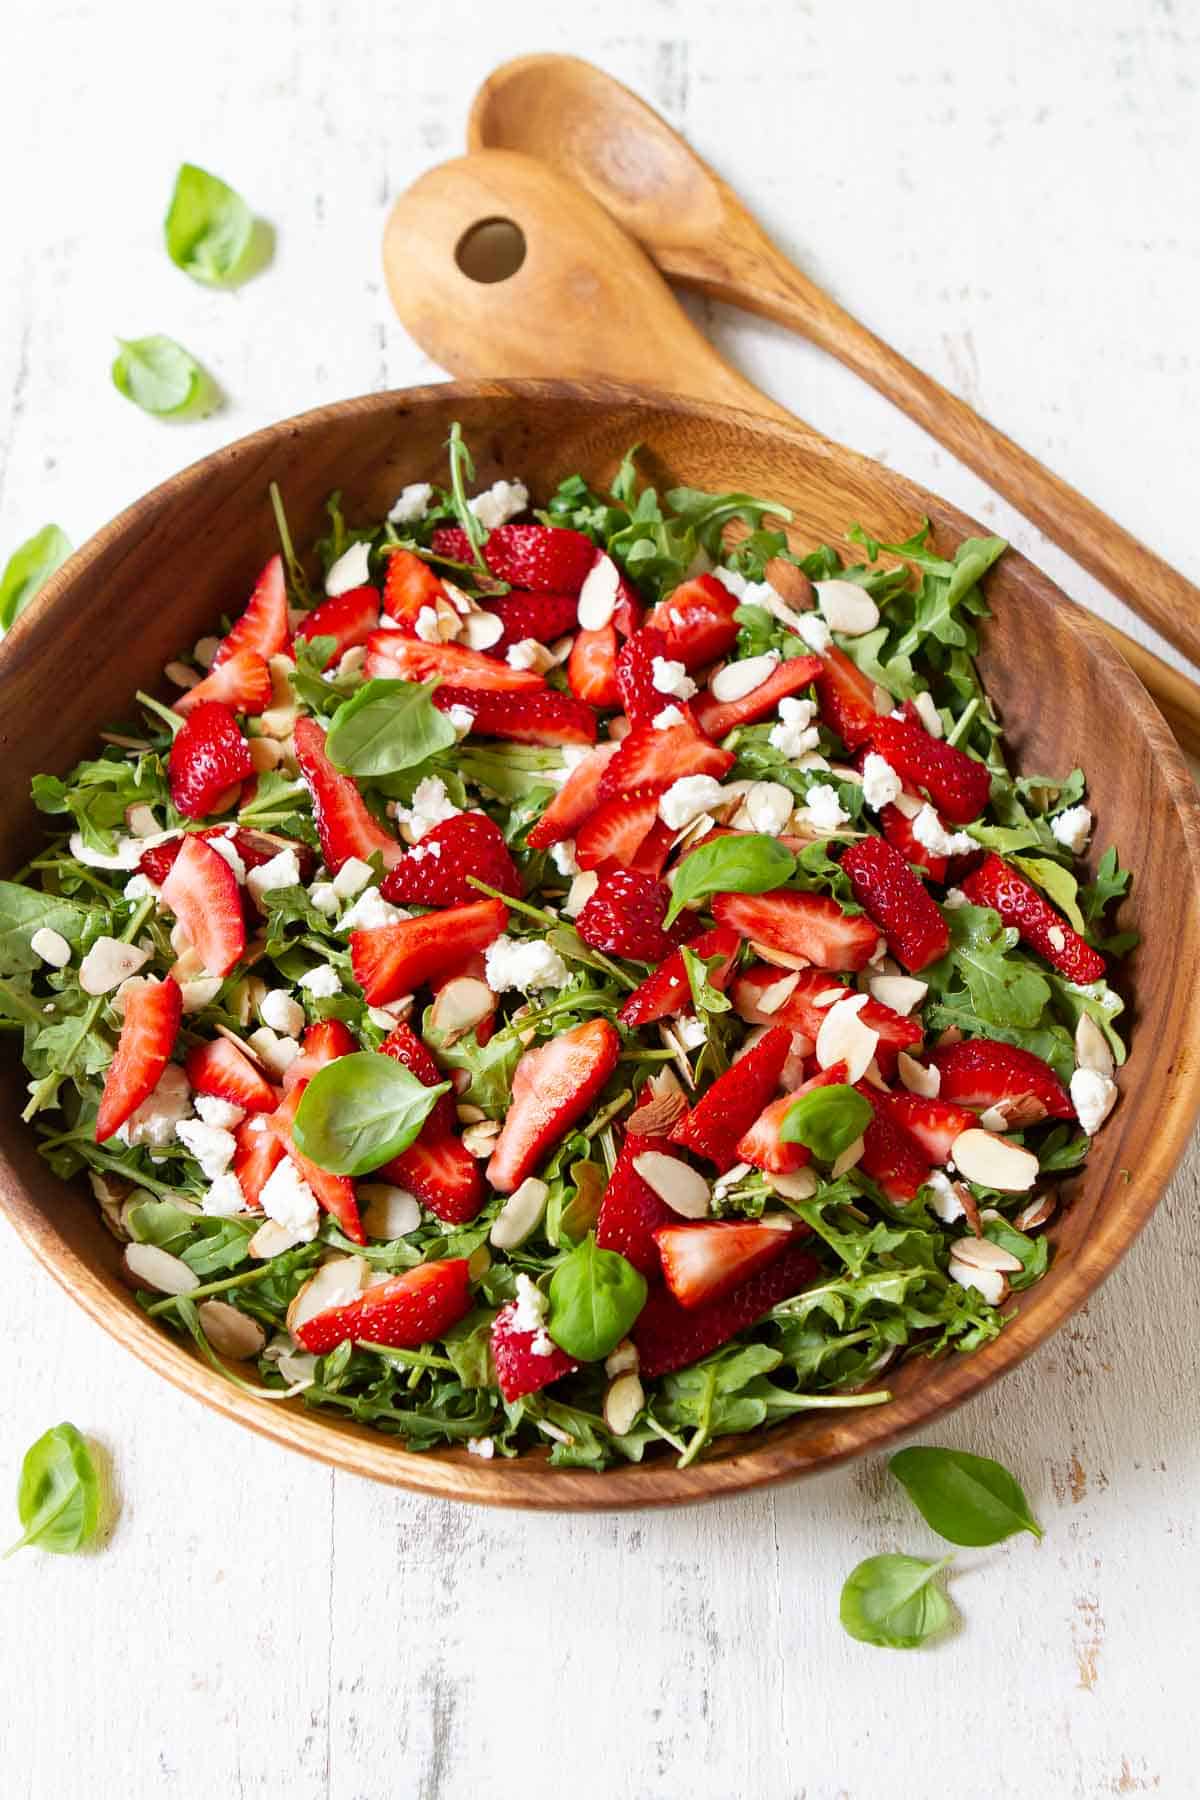 Overhead photograph of arugula salad with strawberries, cheese and almonds in a wooden bowl.